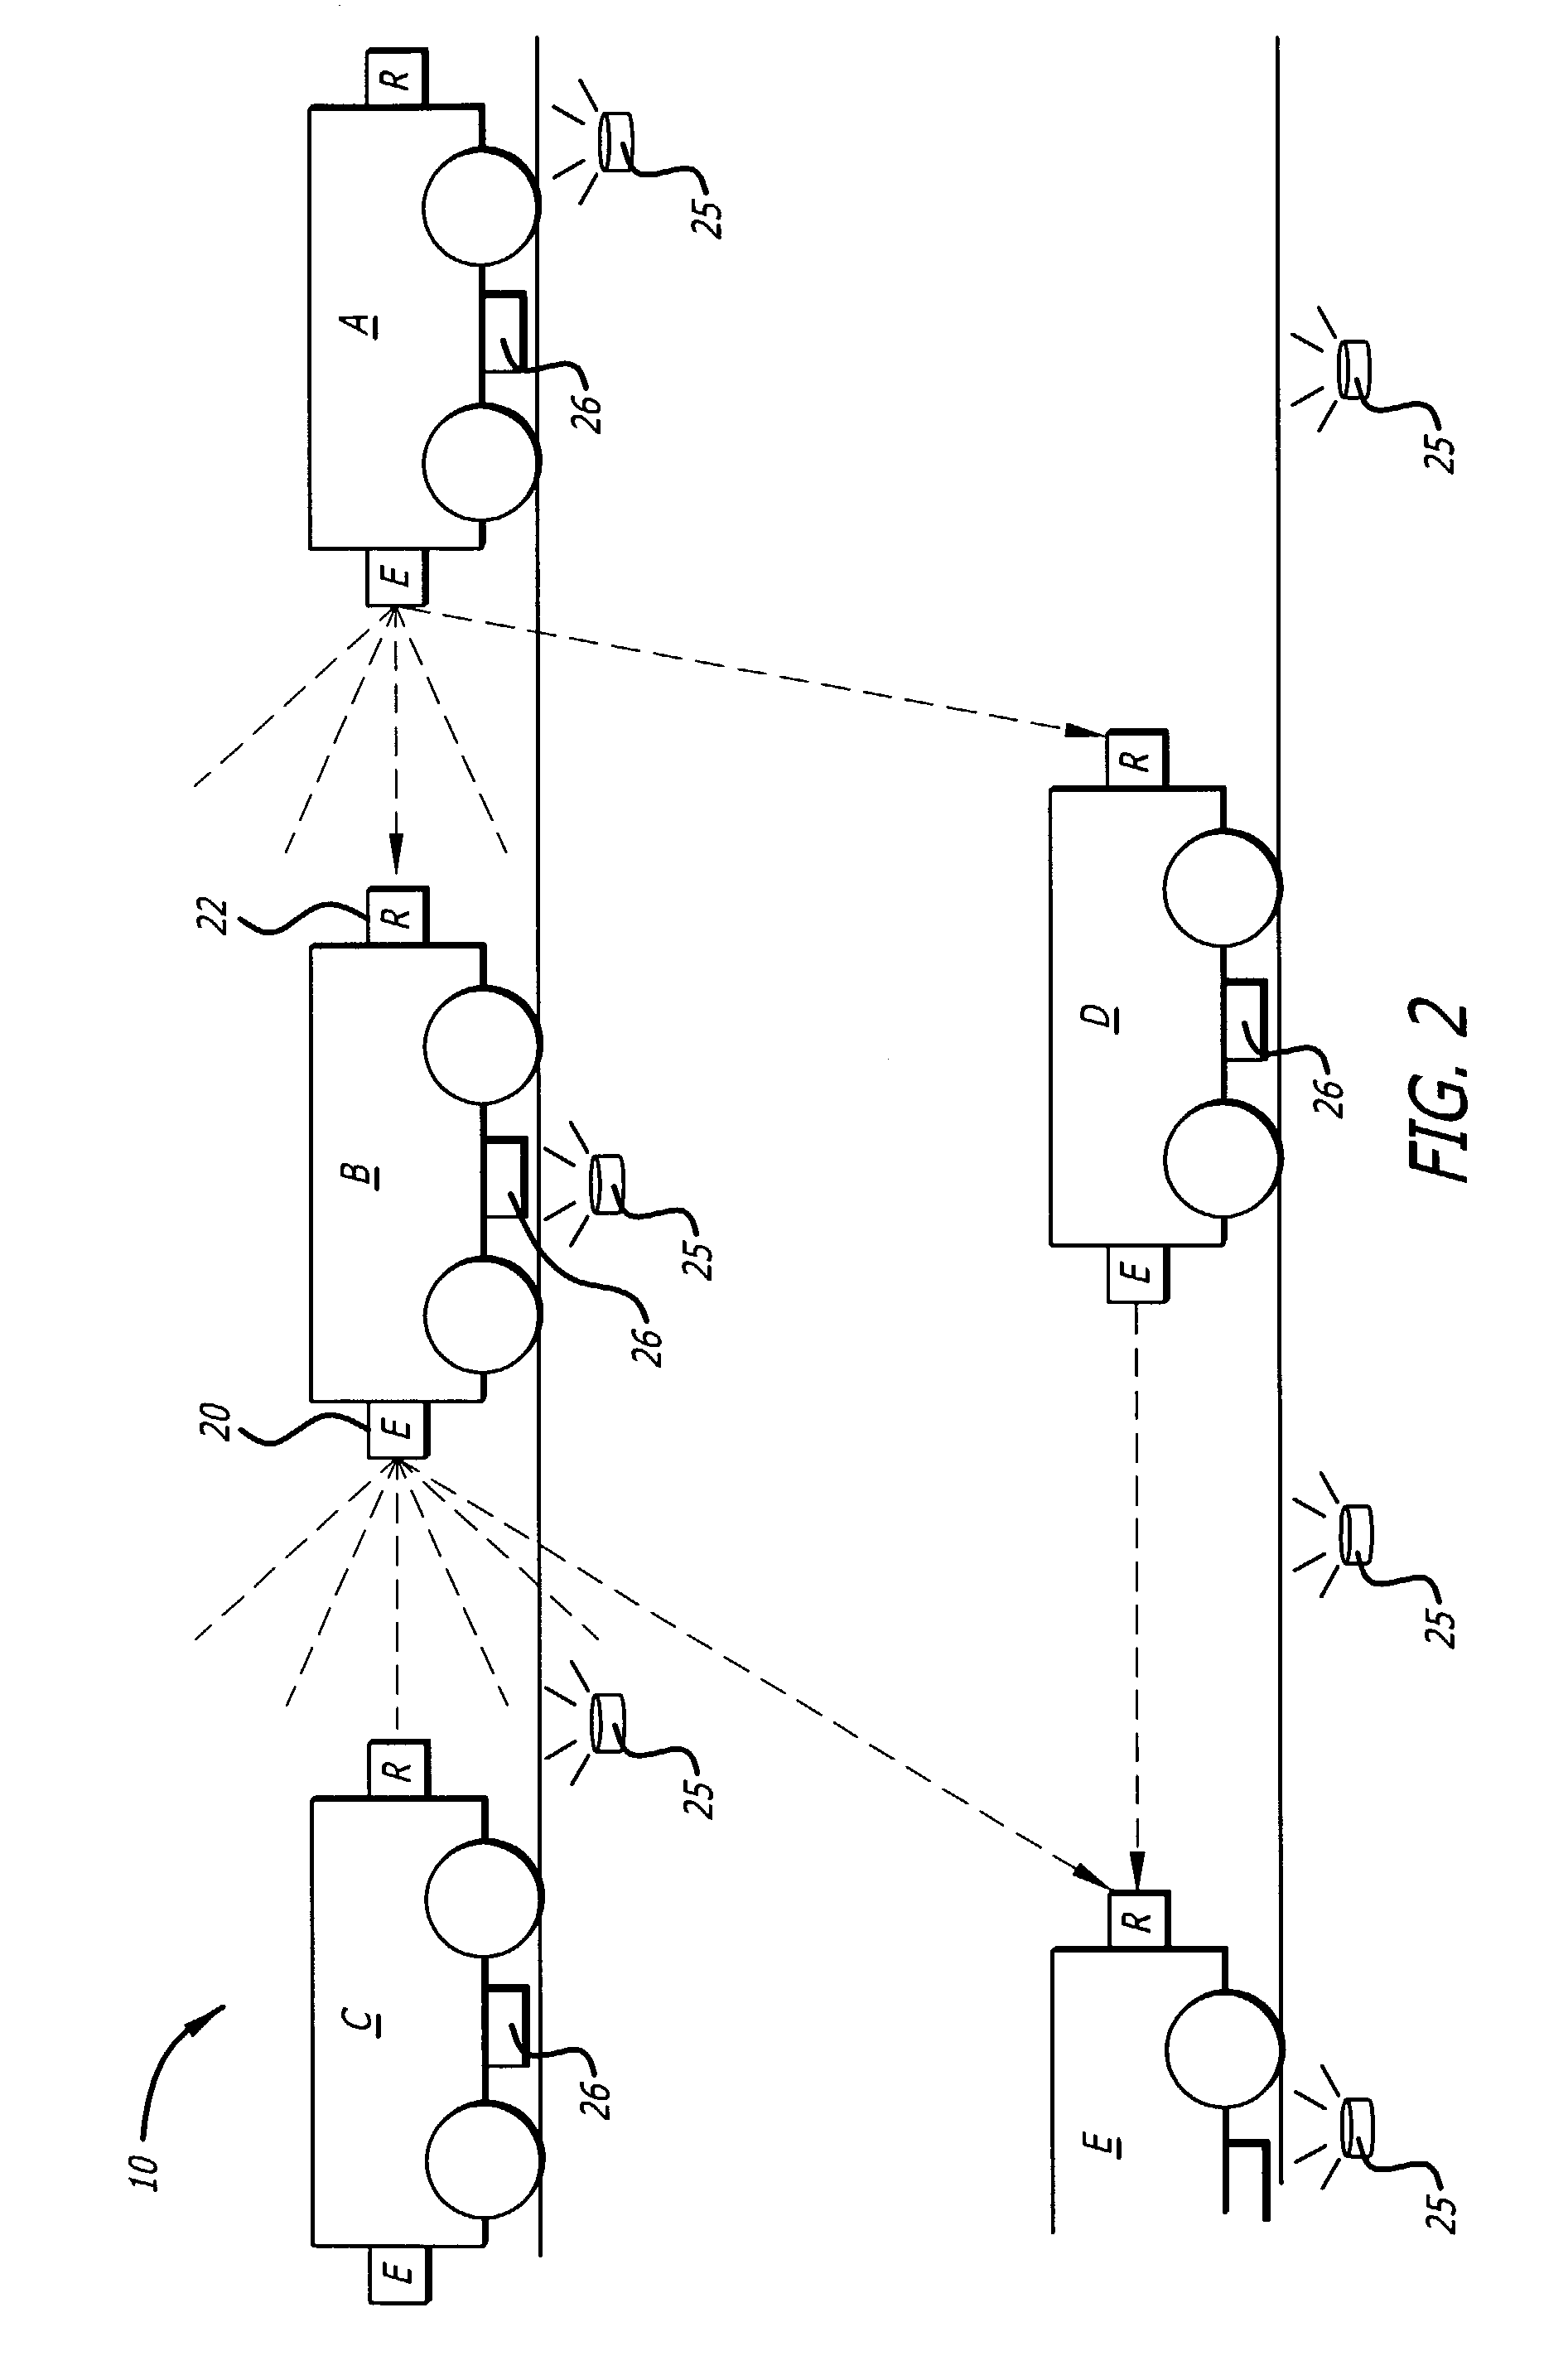 System and method of optical data communication with multiple simultaneous emitters and receivers